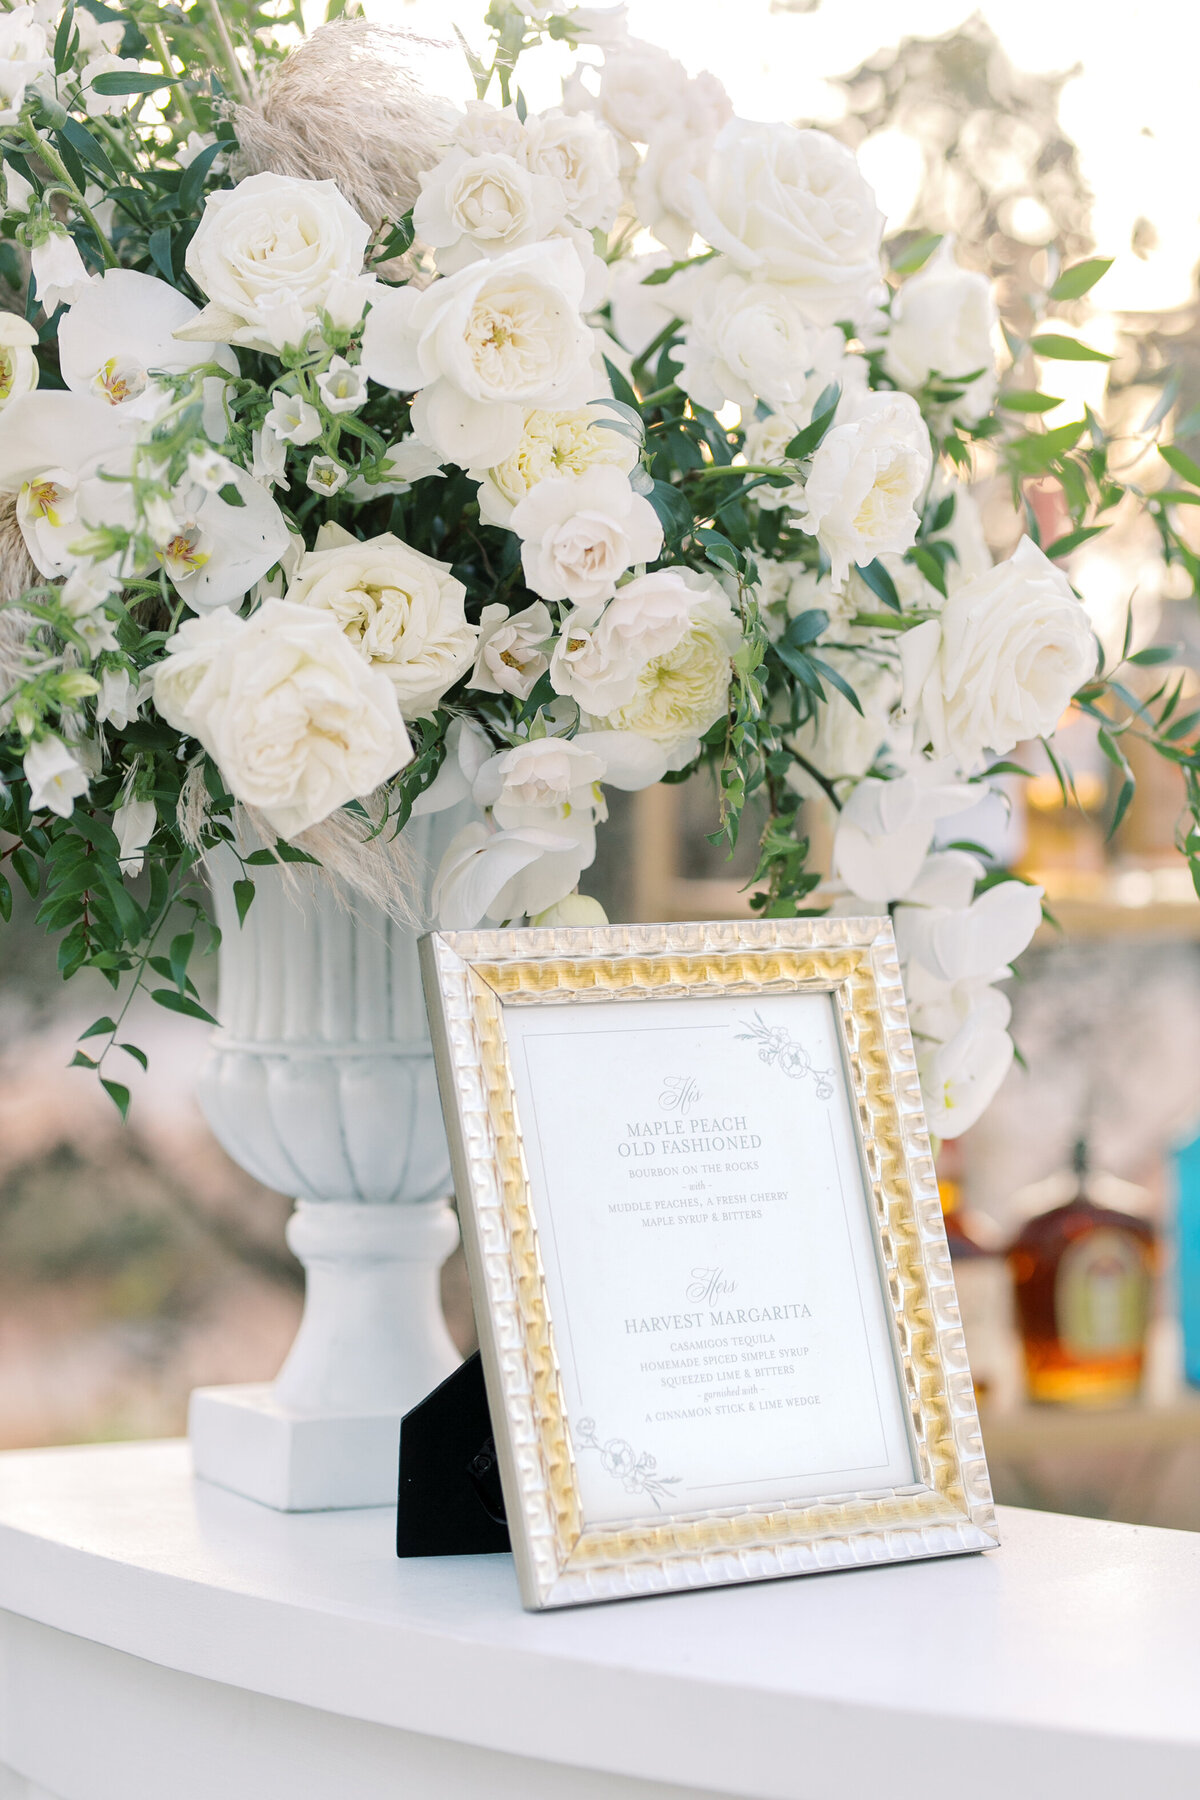 Erin + Nate | Wedding at Seabrook Island Club by Pure Luxe Bride: Johns Island Wedding and Event Planners